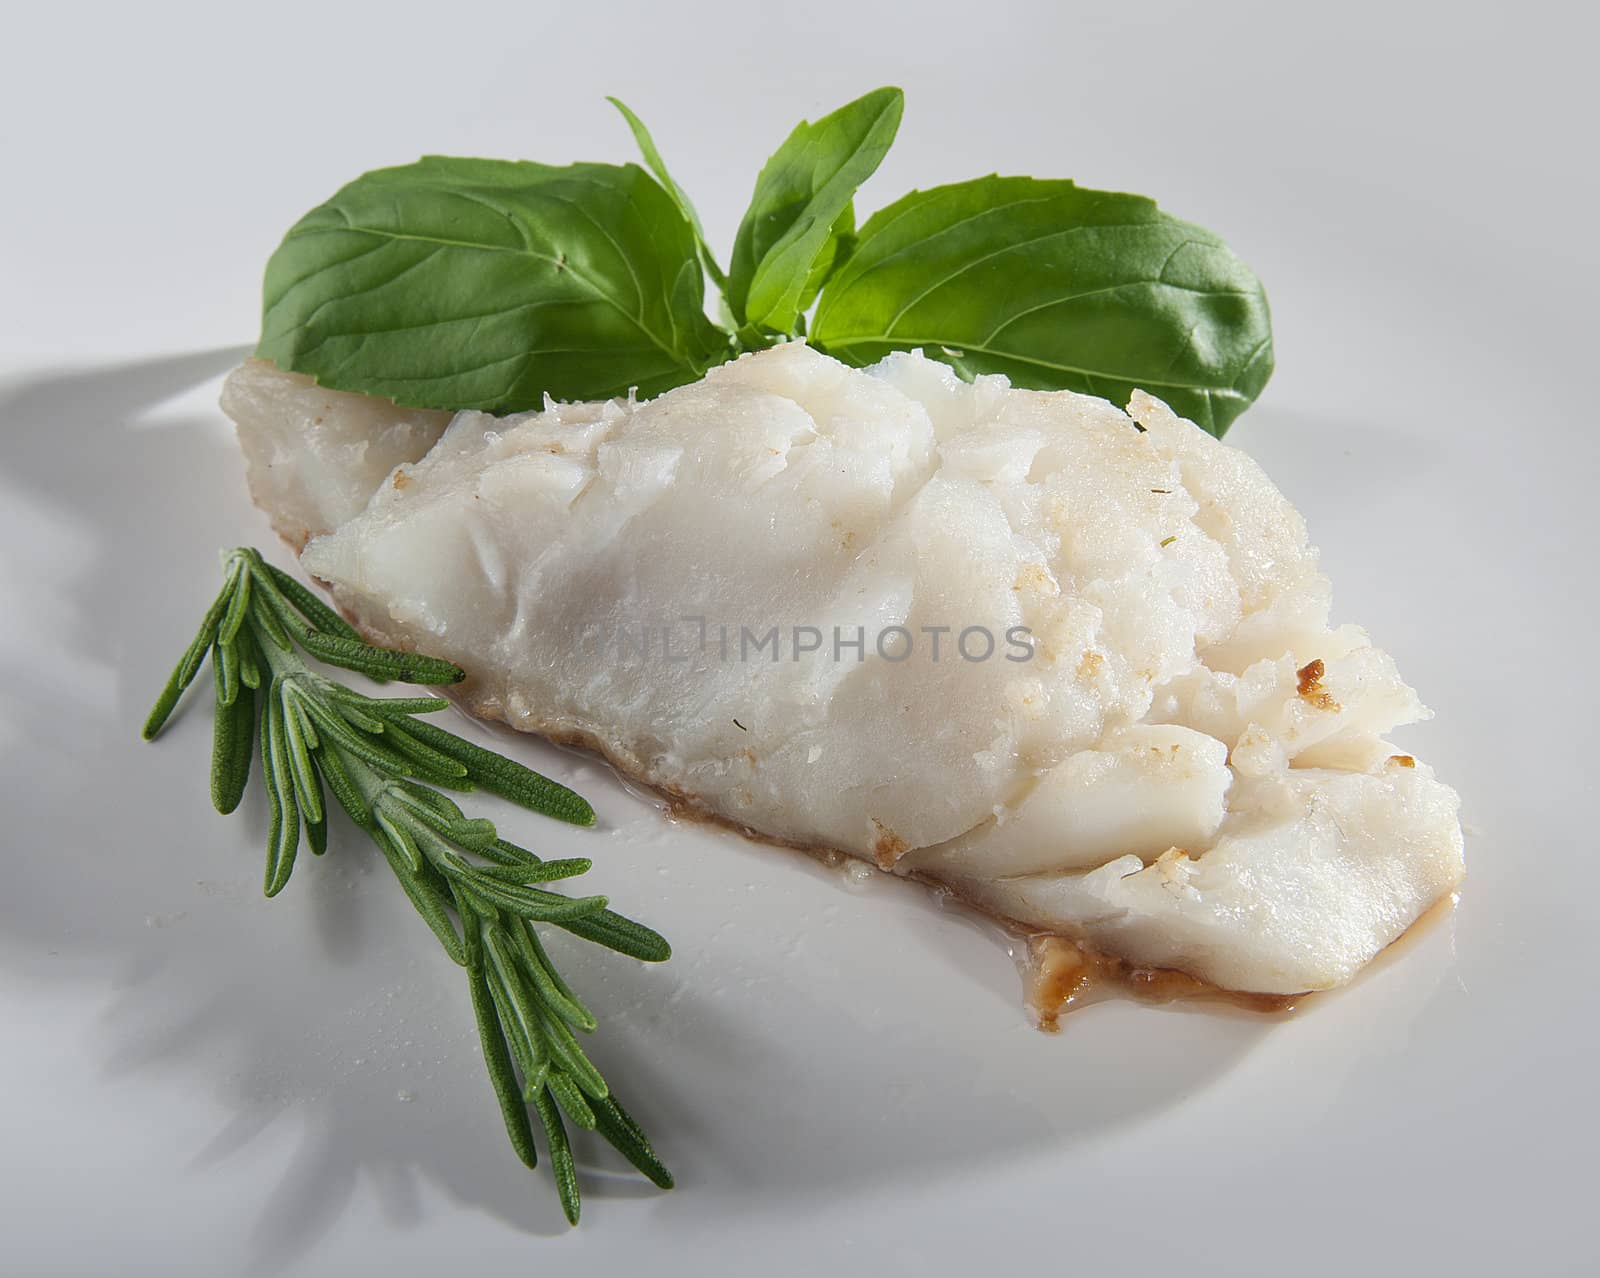 Fried cod with basil and rosemary on the gray